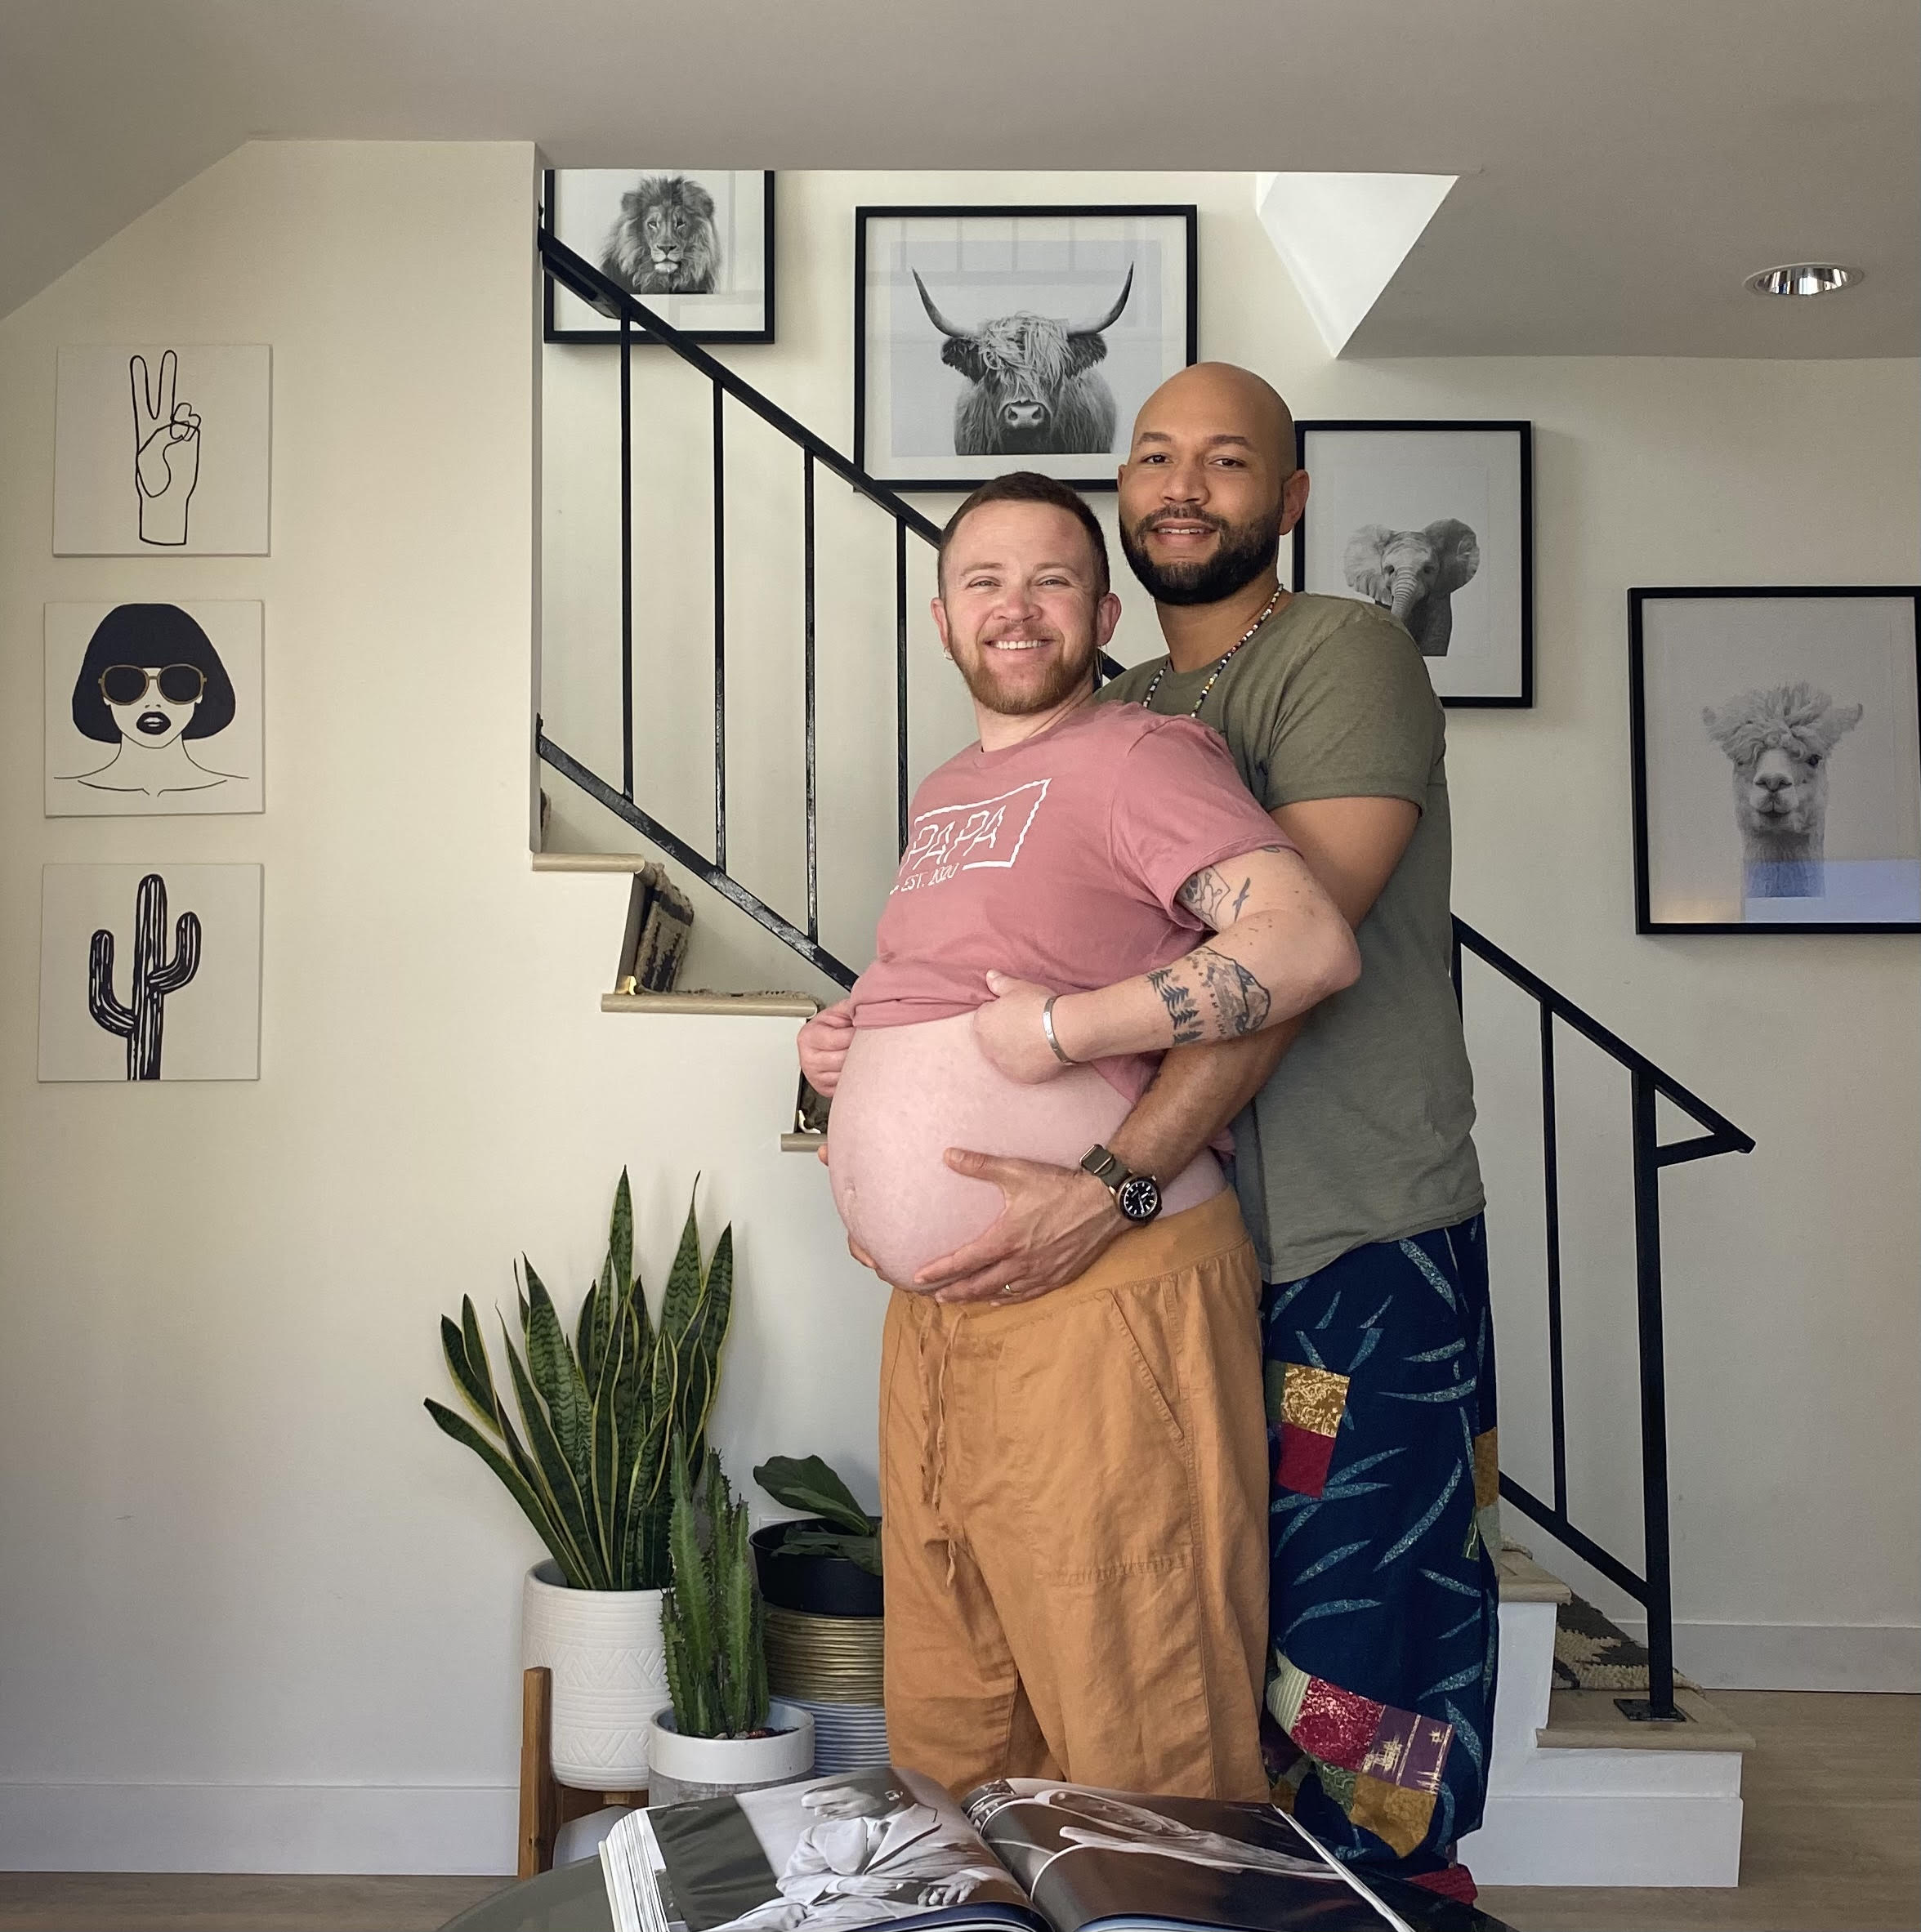 What its like to be pregnant as a transmasculine person